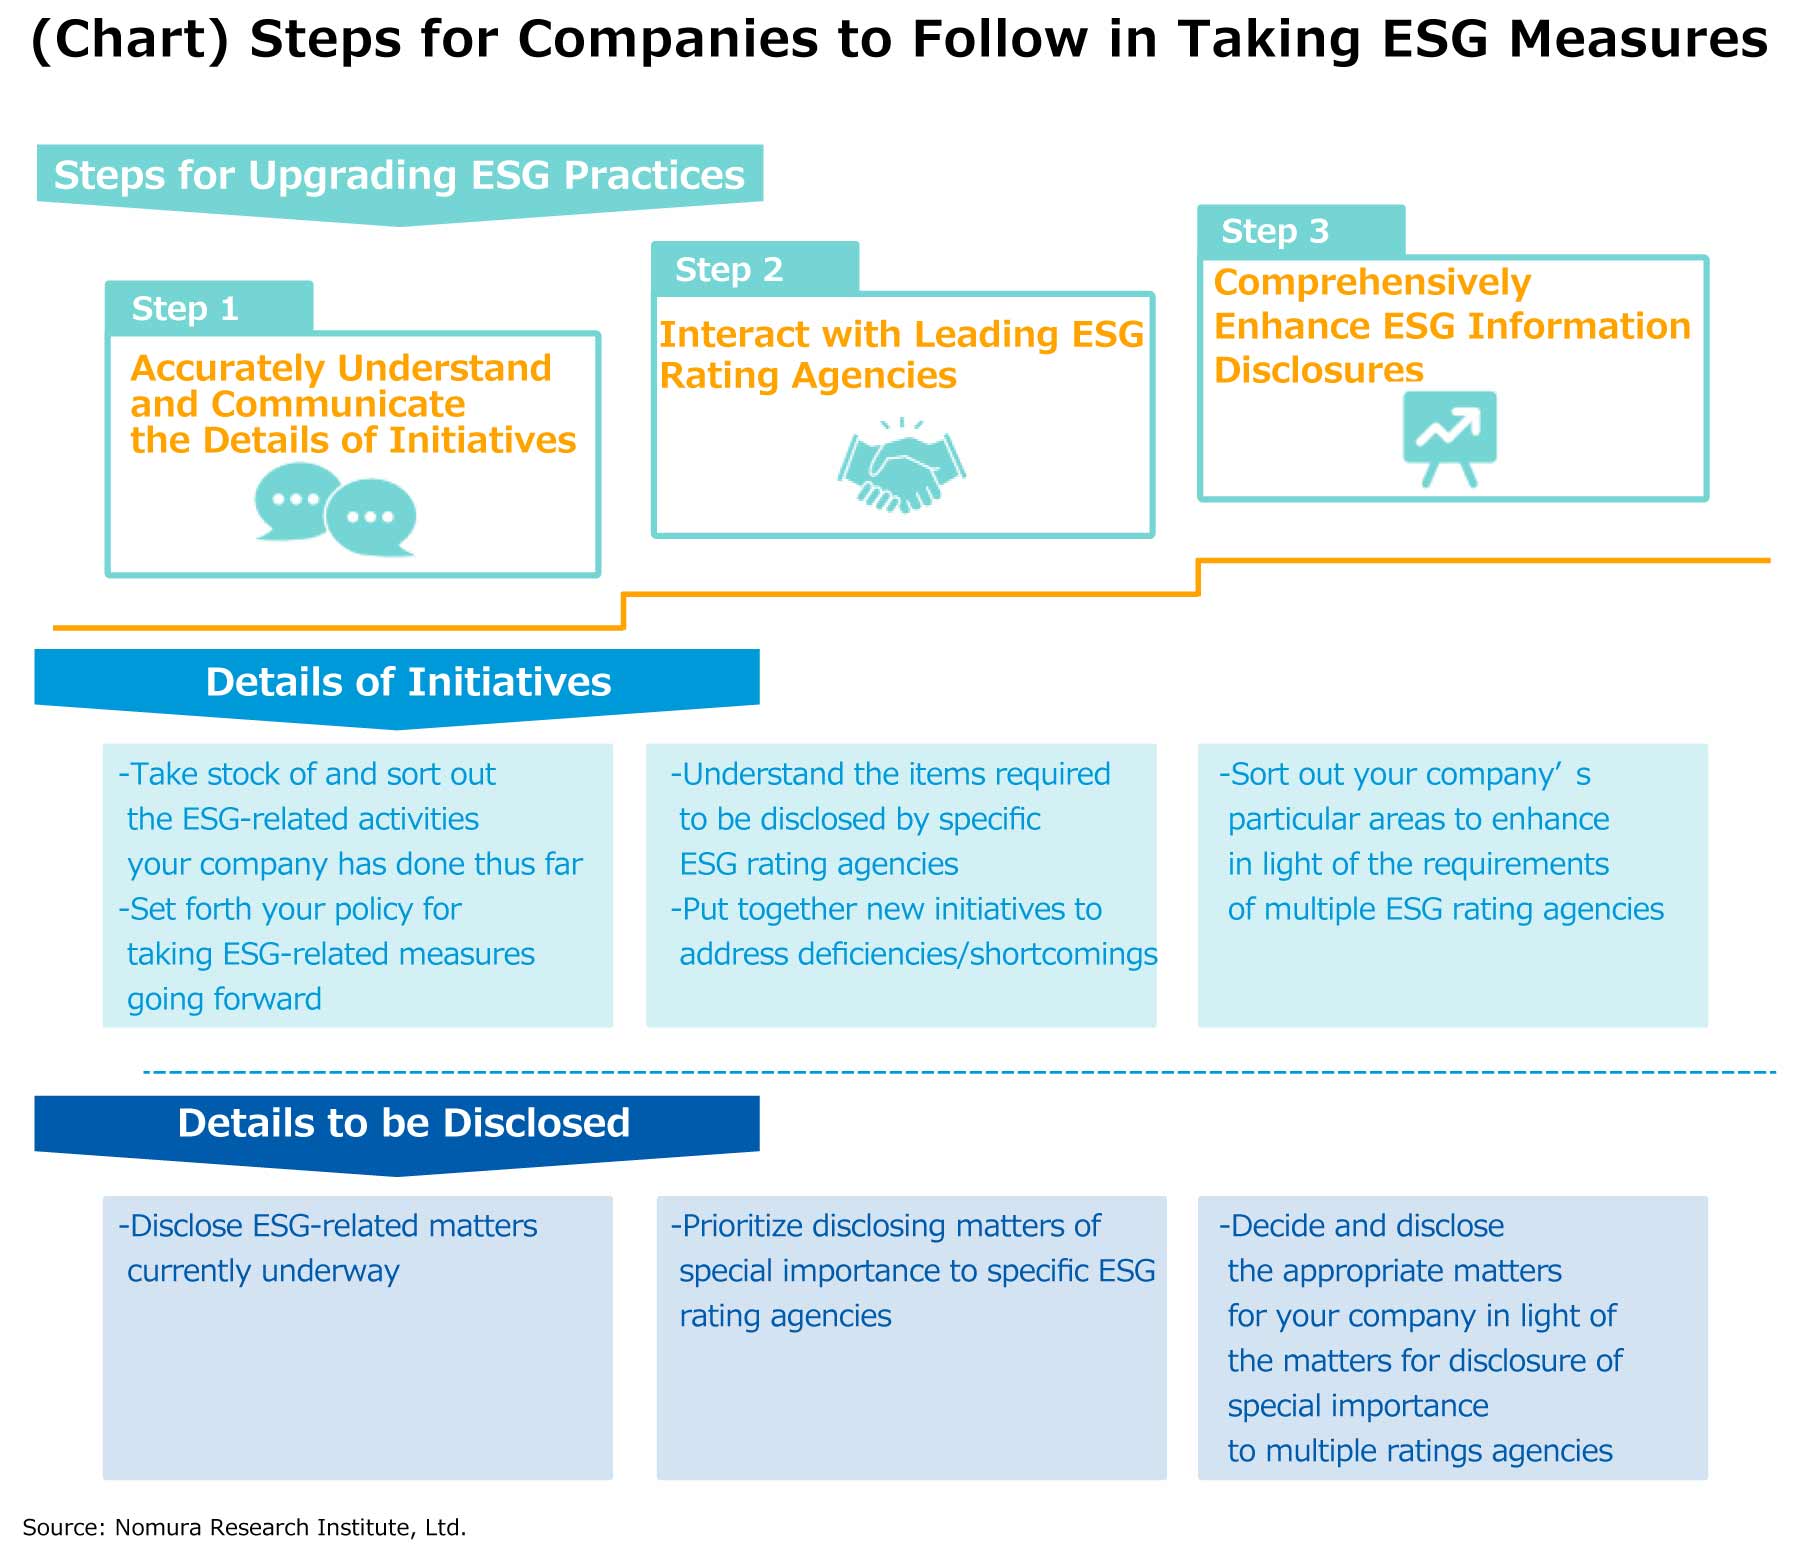 (Chart) Steps for Companies to Follow in Taking ESG Measures